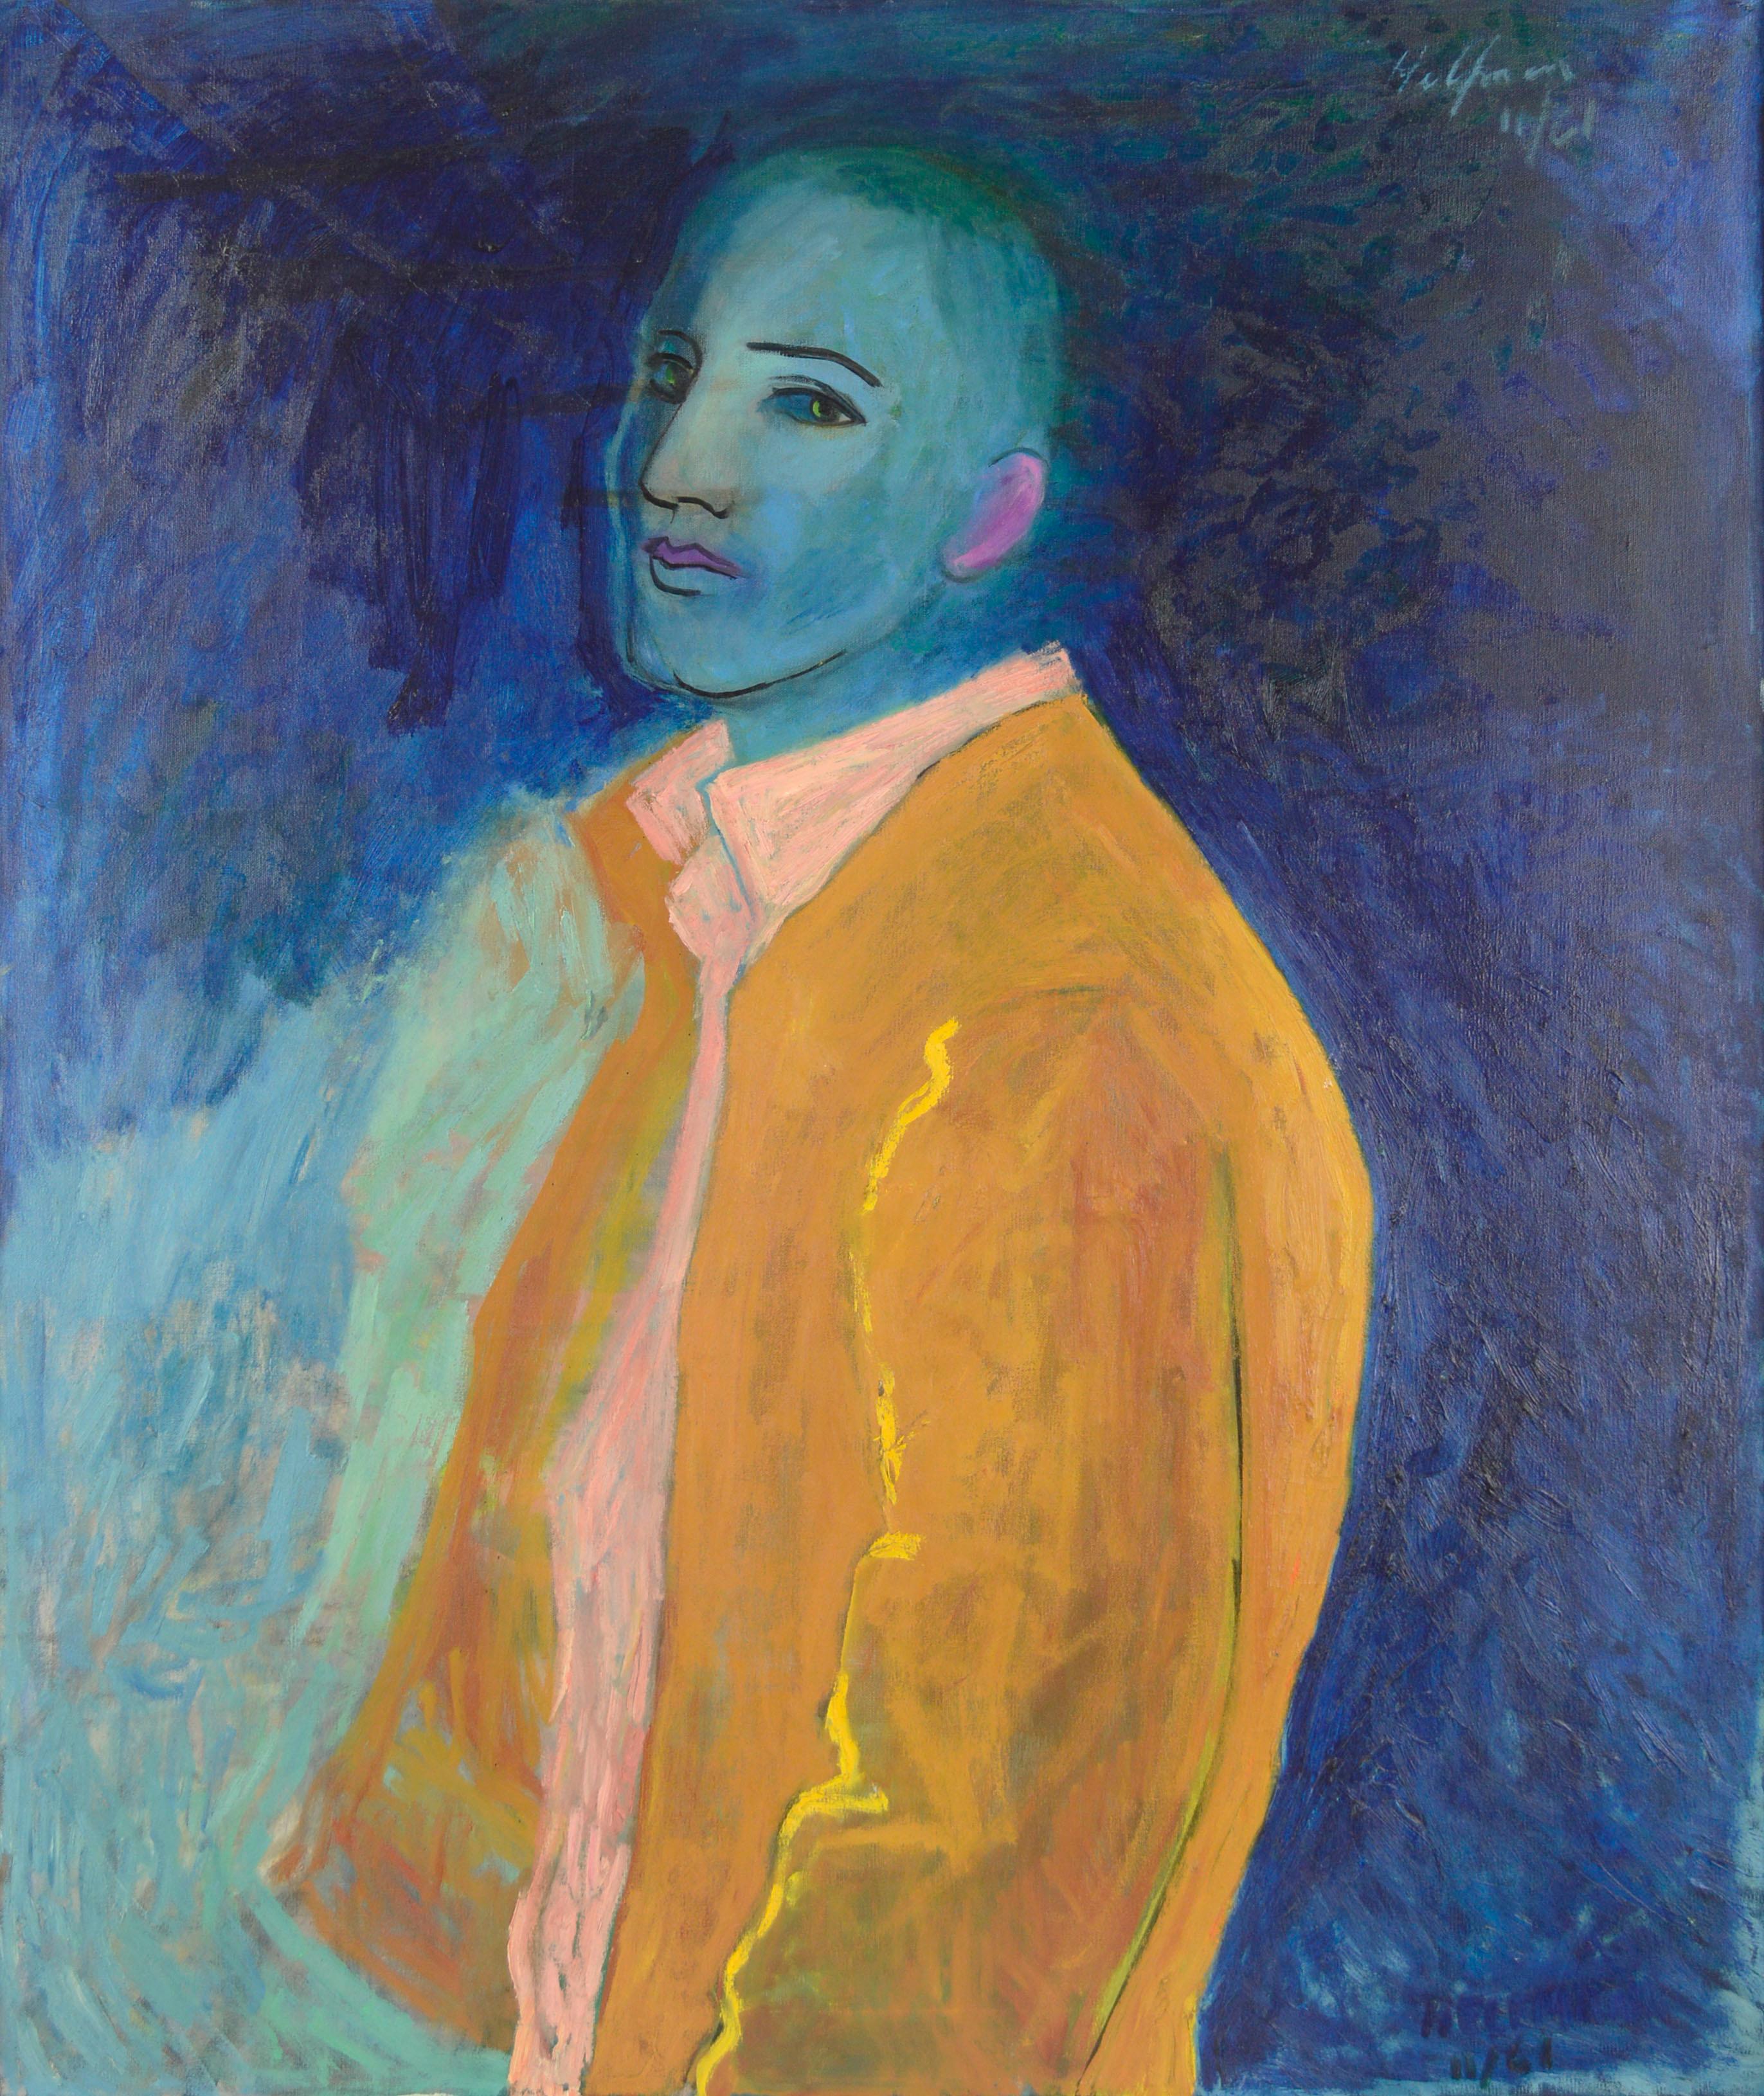 Mid Century Fauvist Self Portrait in Blue and Yellow - Painting by Sydney Helfman